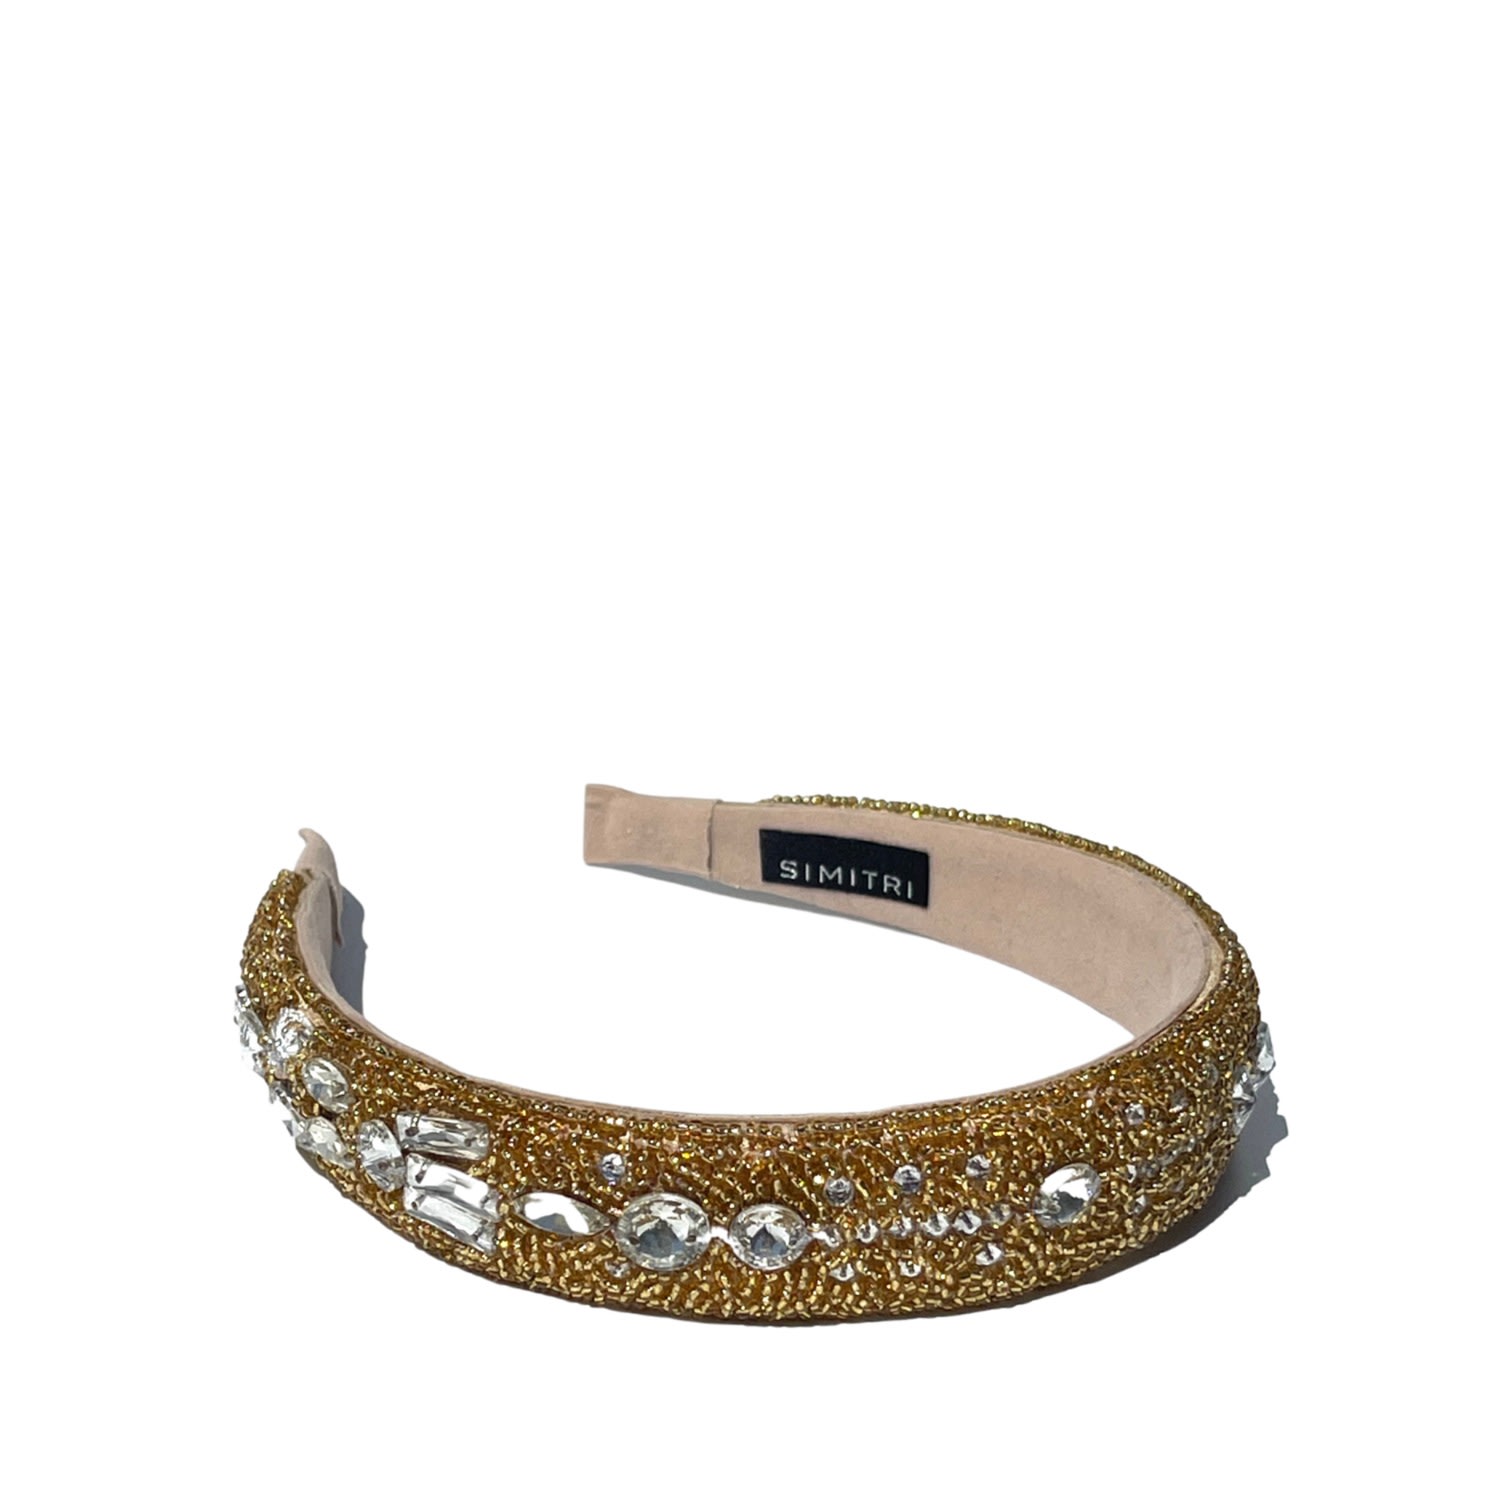 Simitri Women's Gold / Silver Goldest Headband In Brown